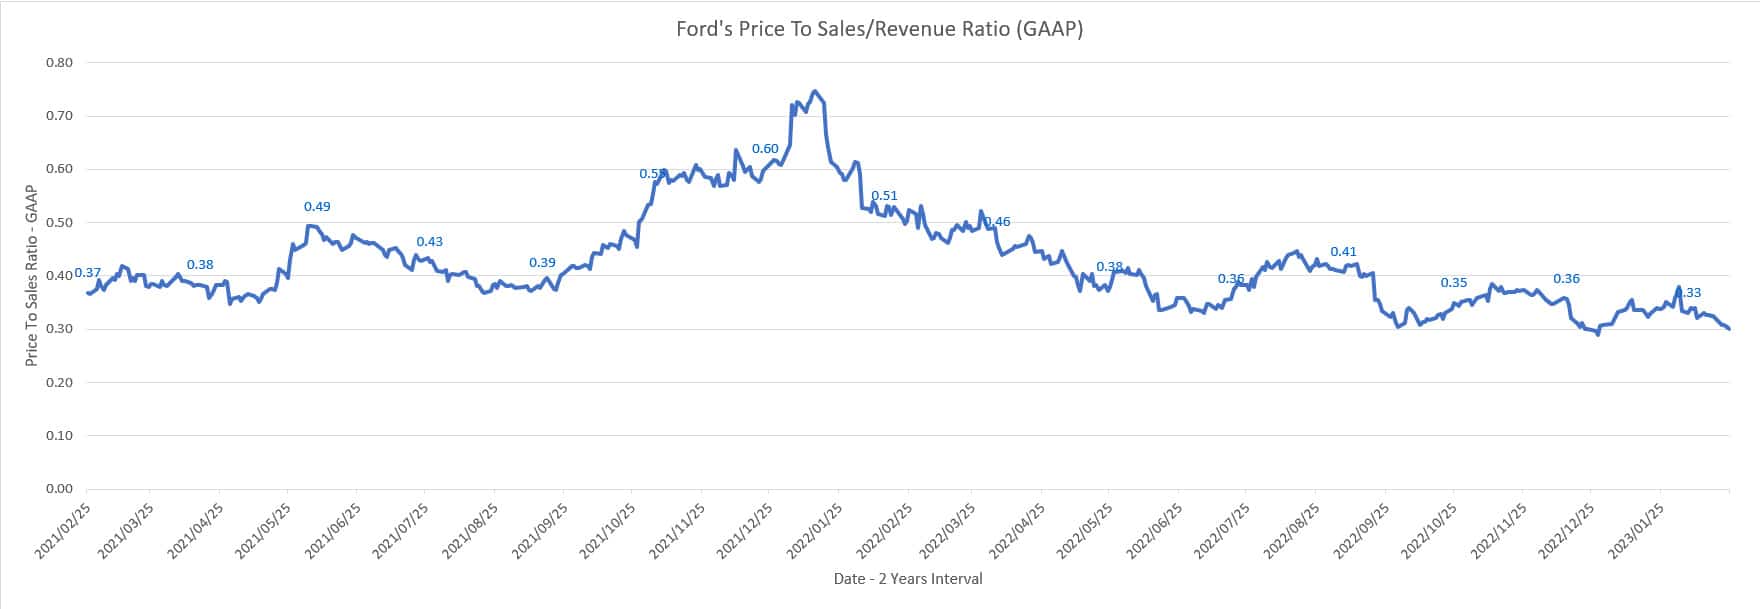 Ford's price to sales ratio